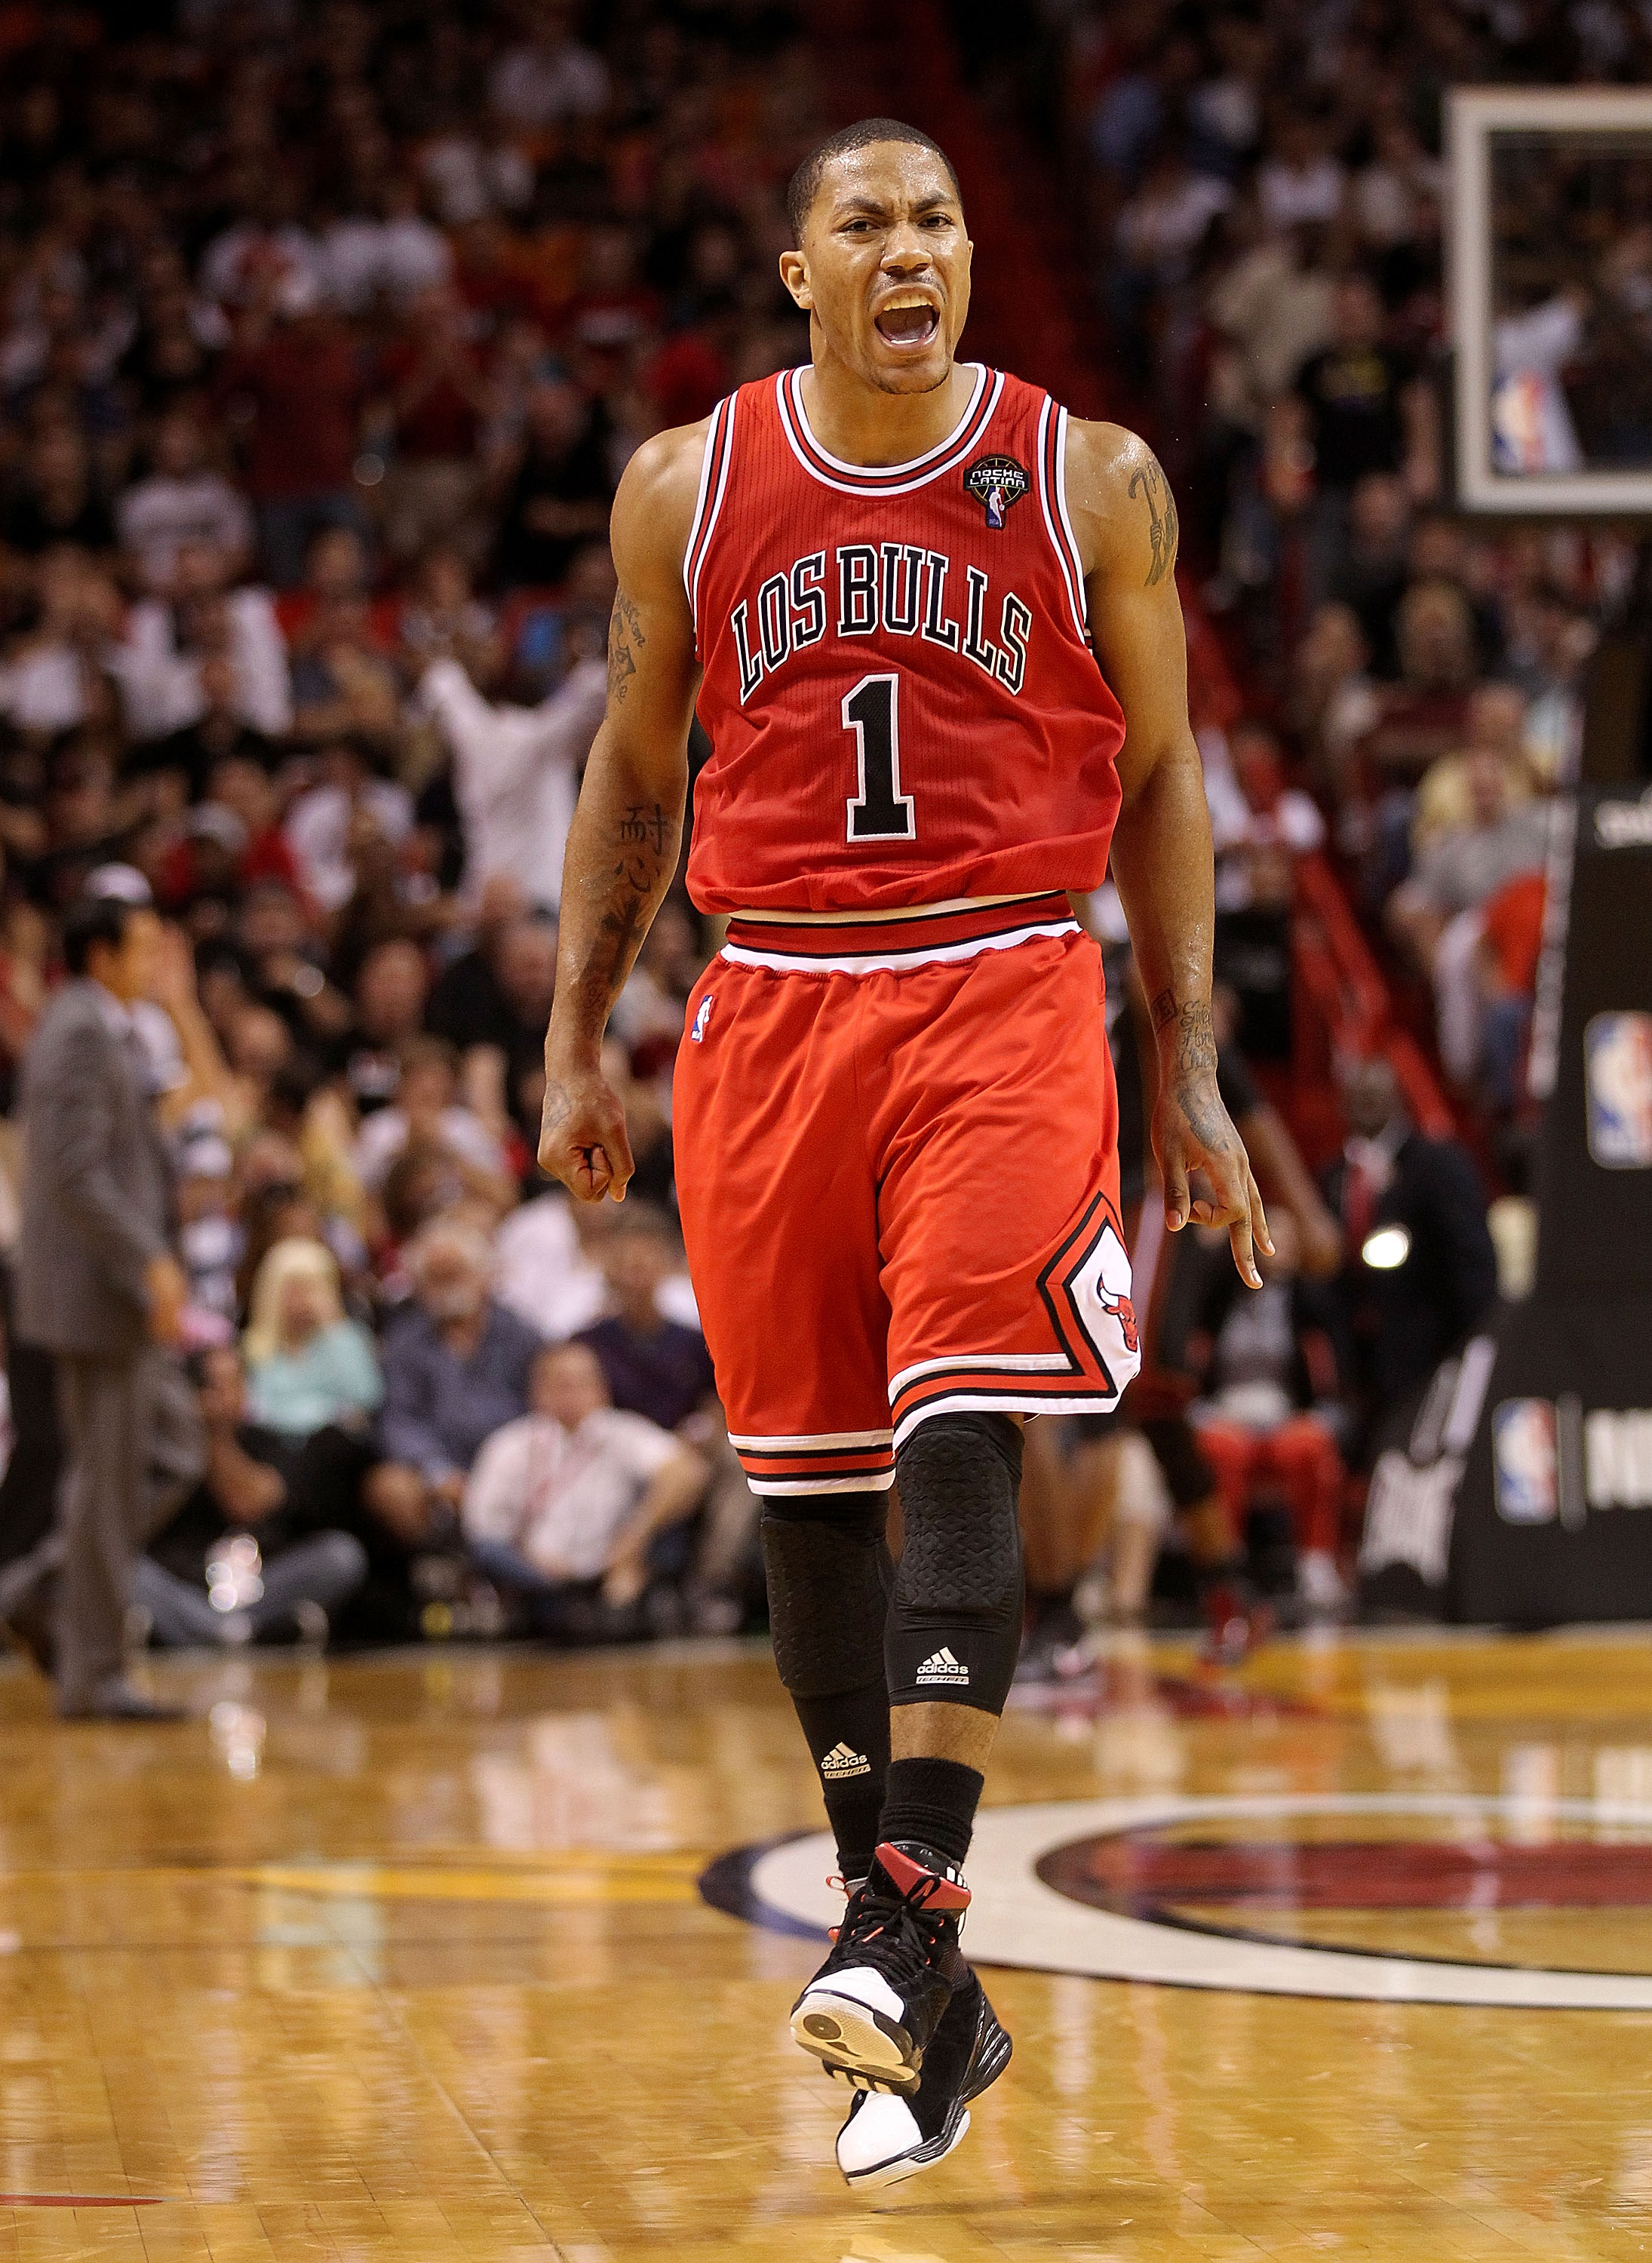 MIAMI, FL - MARCH 06:  Derrick Rose #1 of the Chicago Bulls reacts after making a key 3 pointer during a game against the Miami Heat at American Airlines Arena on March 6, 2011 in Miami, Florida. NOTE TO USER: User expressly acknowledges and agrees that,